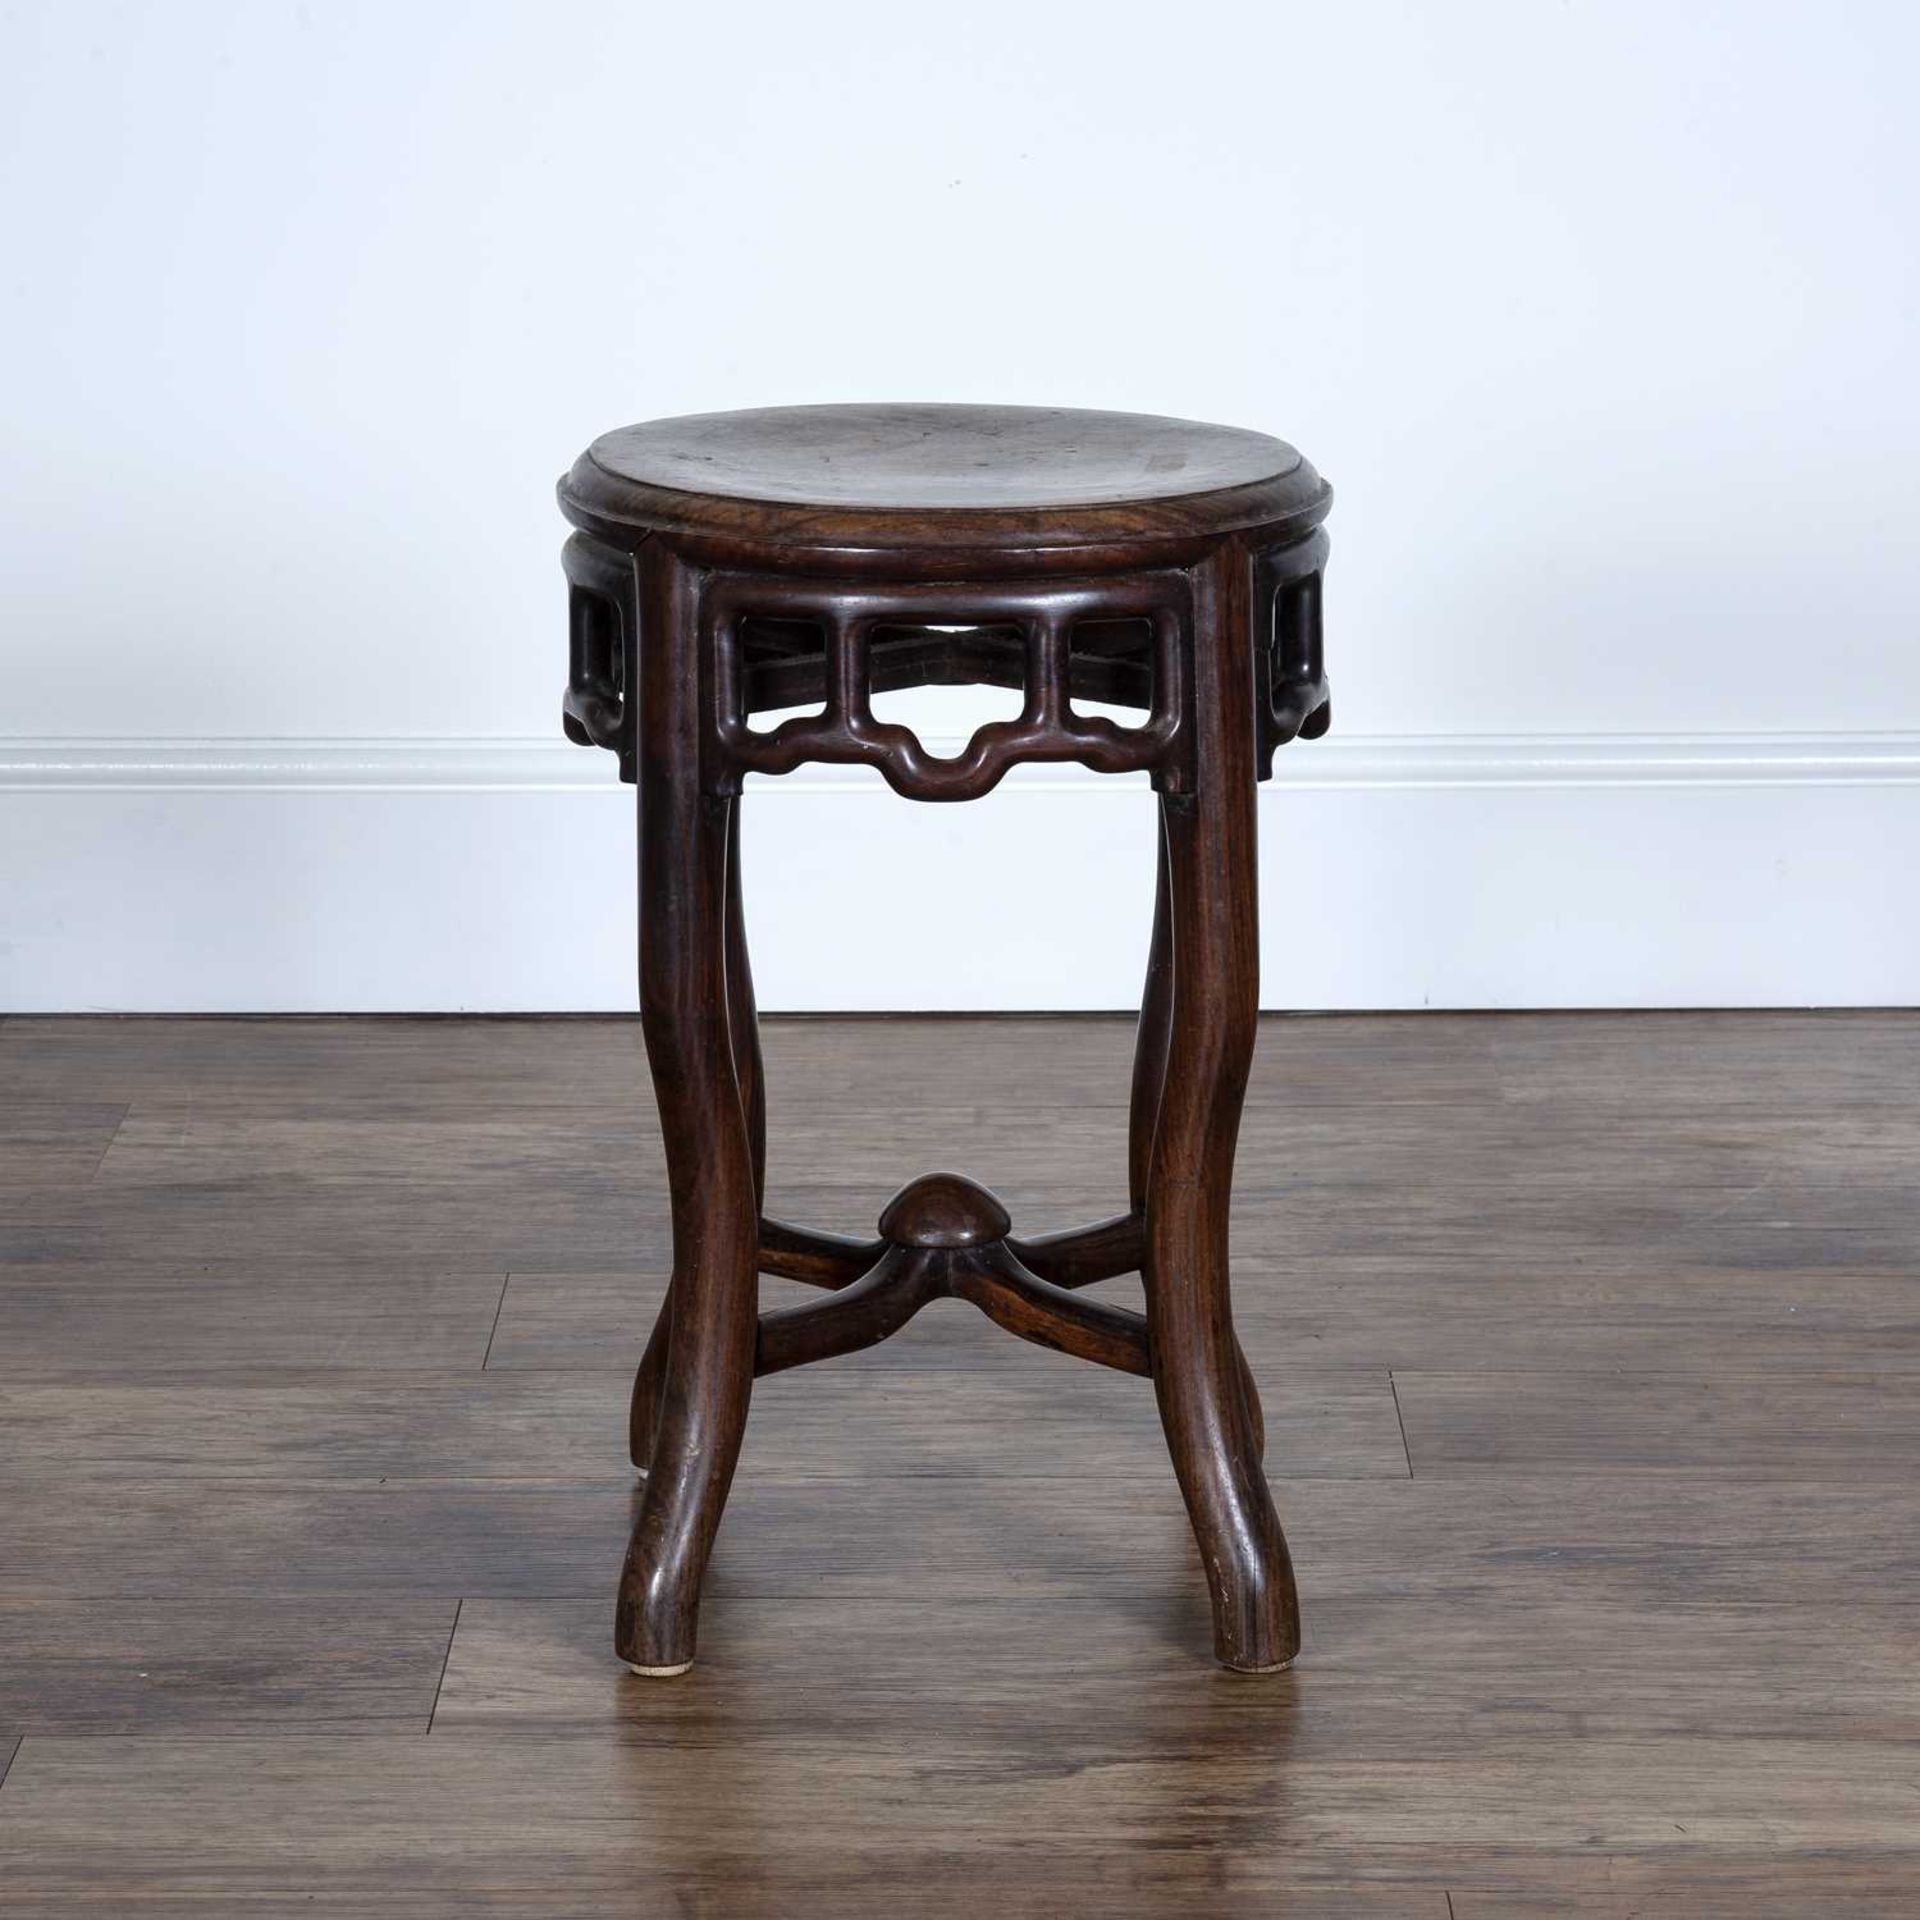 Hardwood stand/stool Chinese, late 19th Century with openwork frieze on shaped supports with